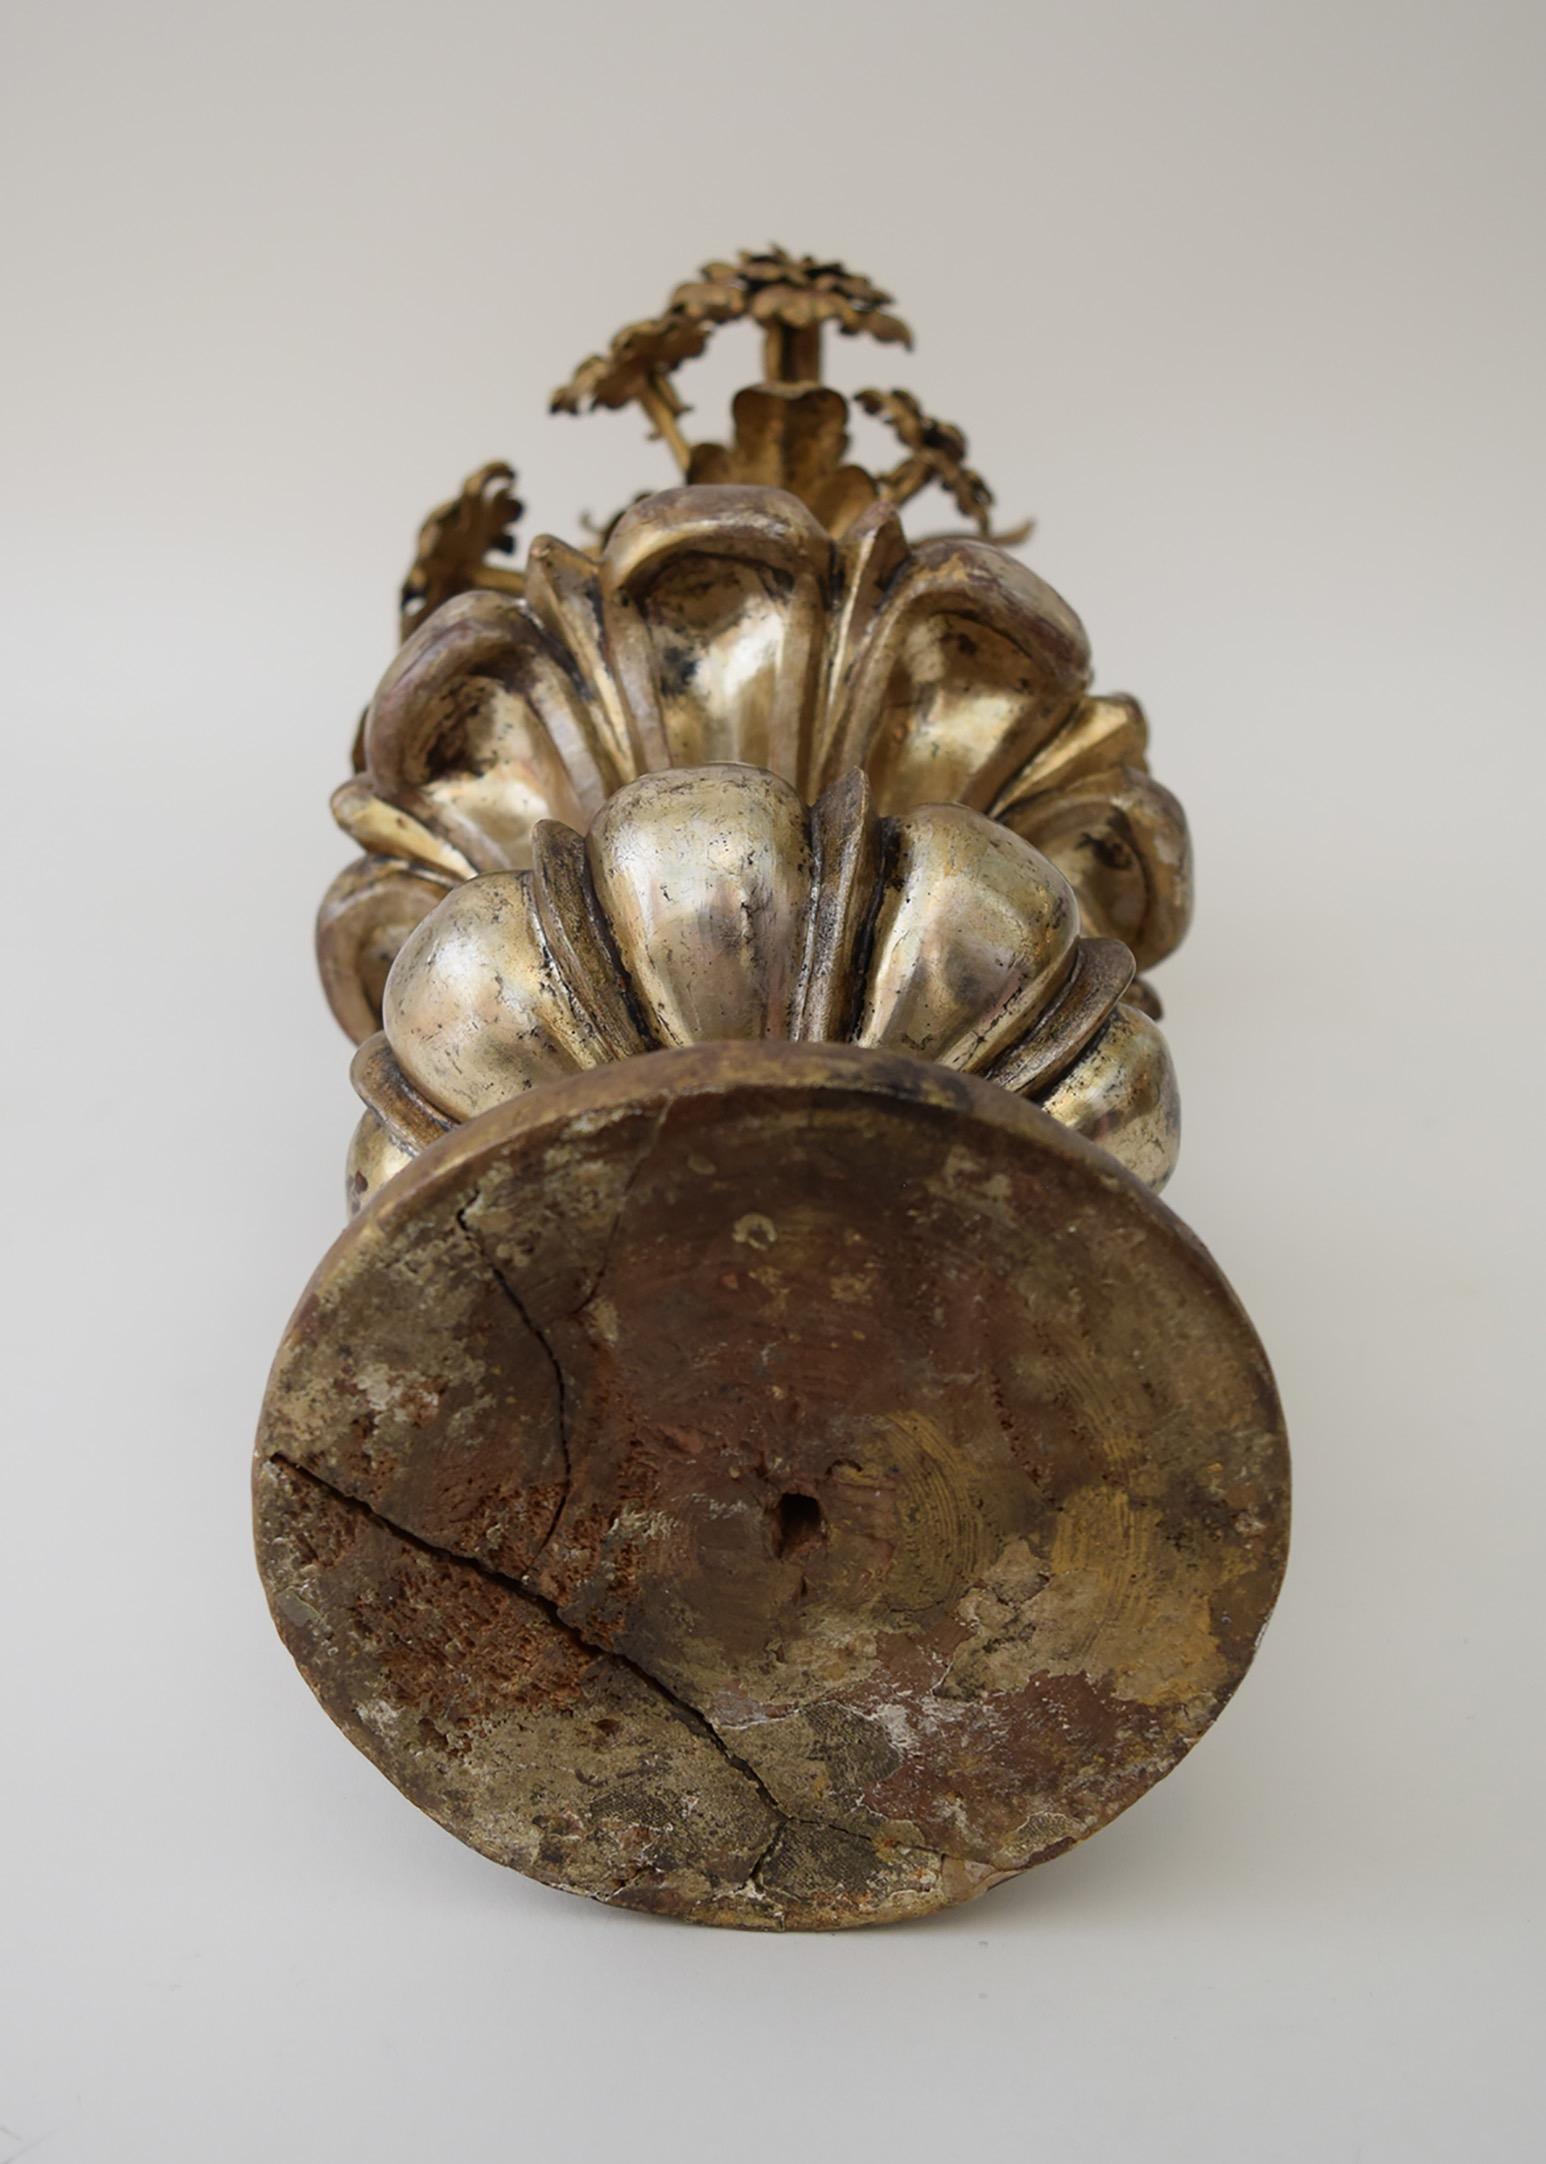 Early 18th Century Silver and Gold Sculpture of a Flowering Urn